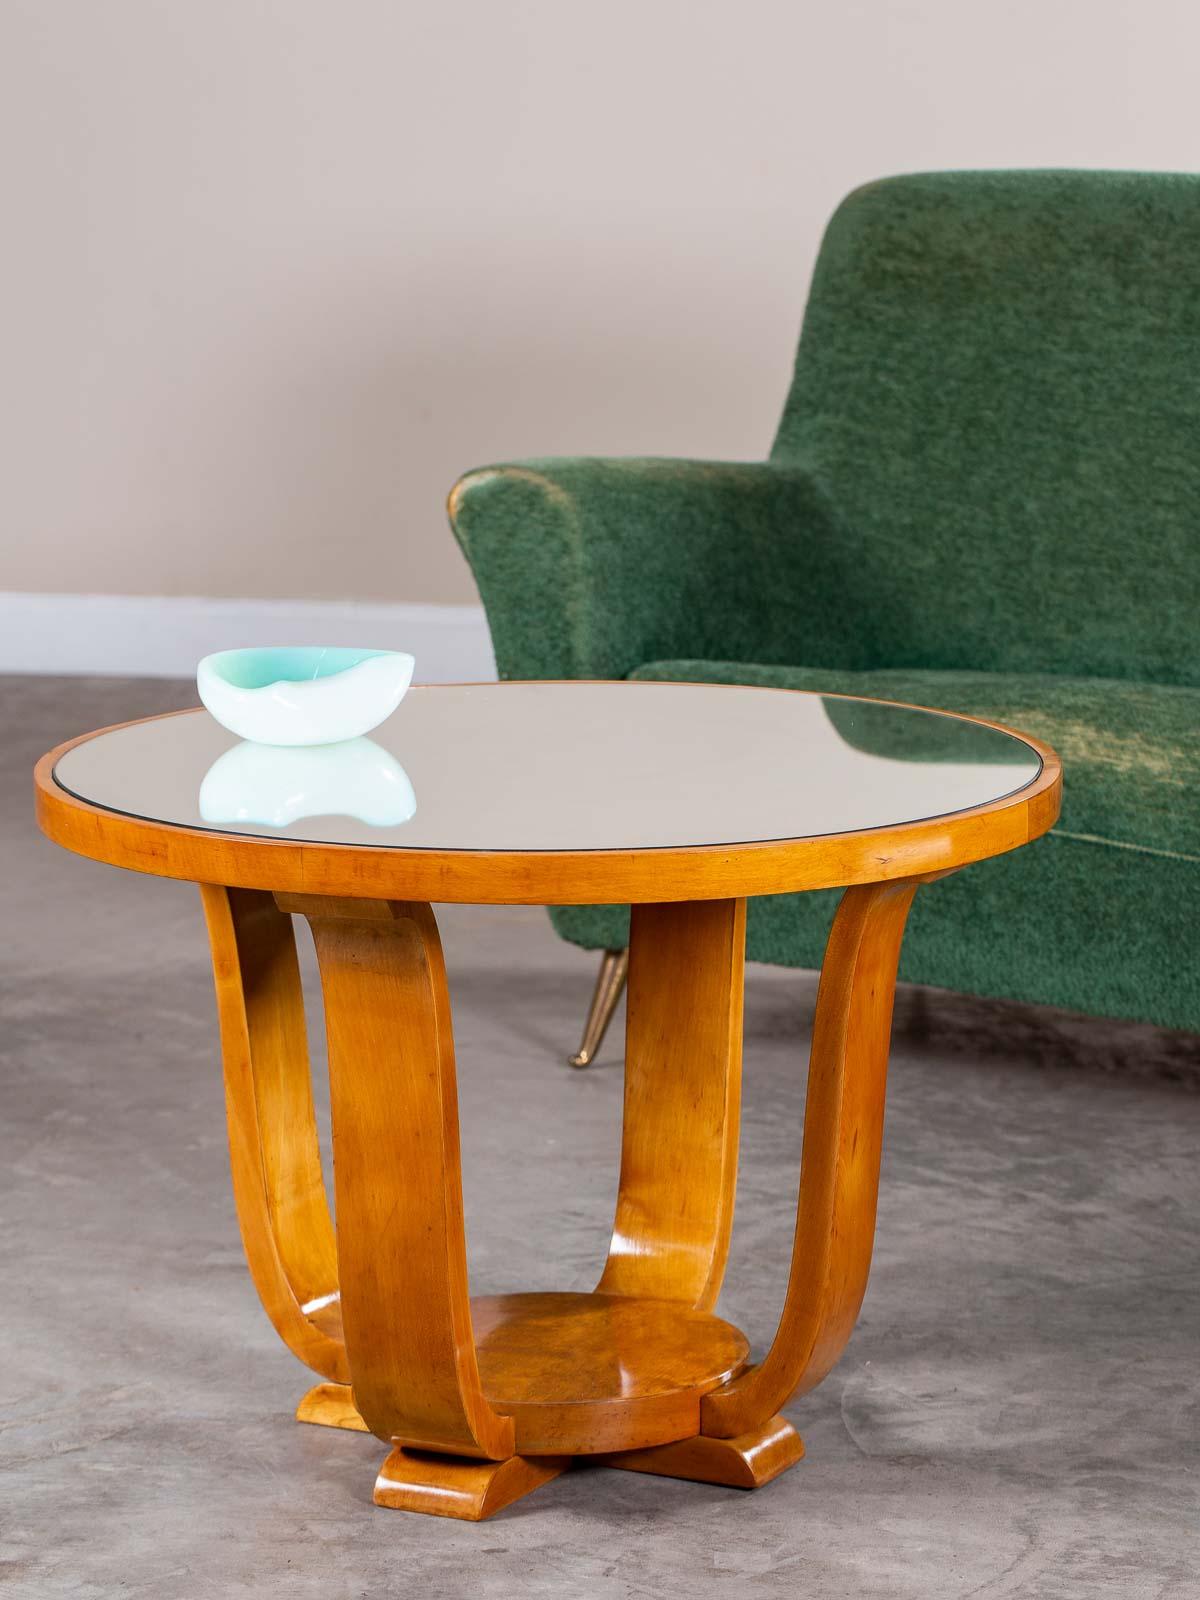 This circular French Art Deco cherrywood table circa 1935 has four sensuously curved legs joining the round top to a raised circular base elevated with four feet. Please enlarge the photographs to see the beauty of the timber as well as the cabinet